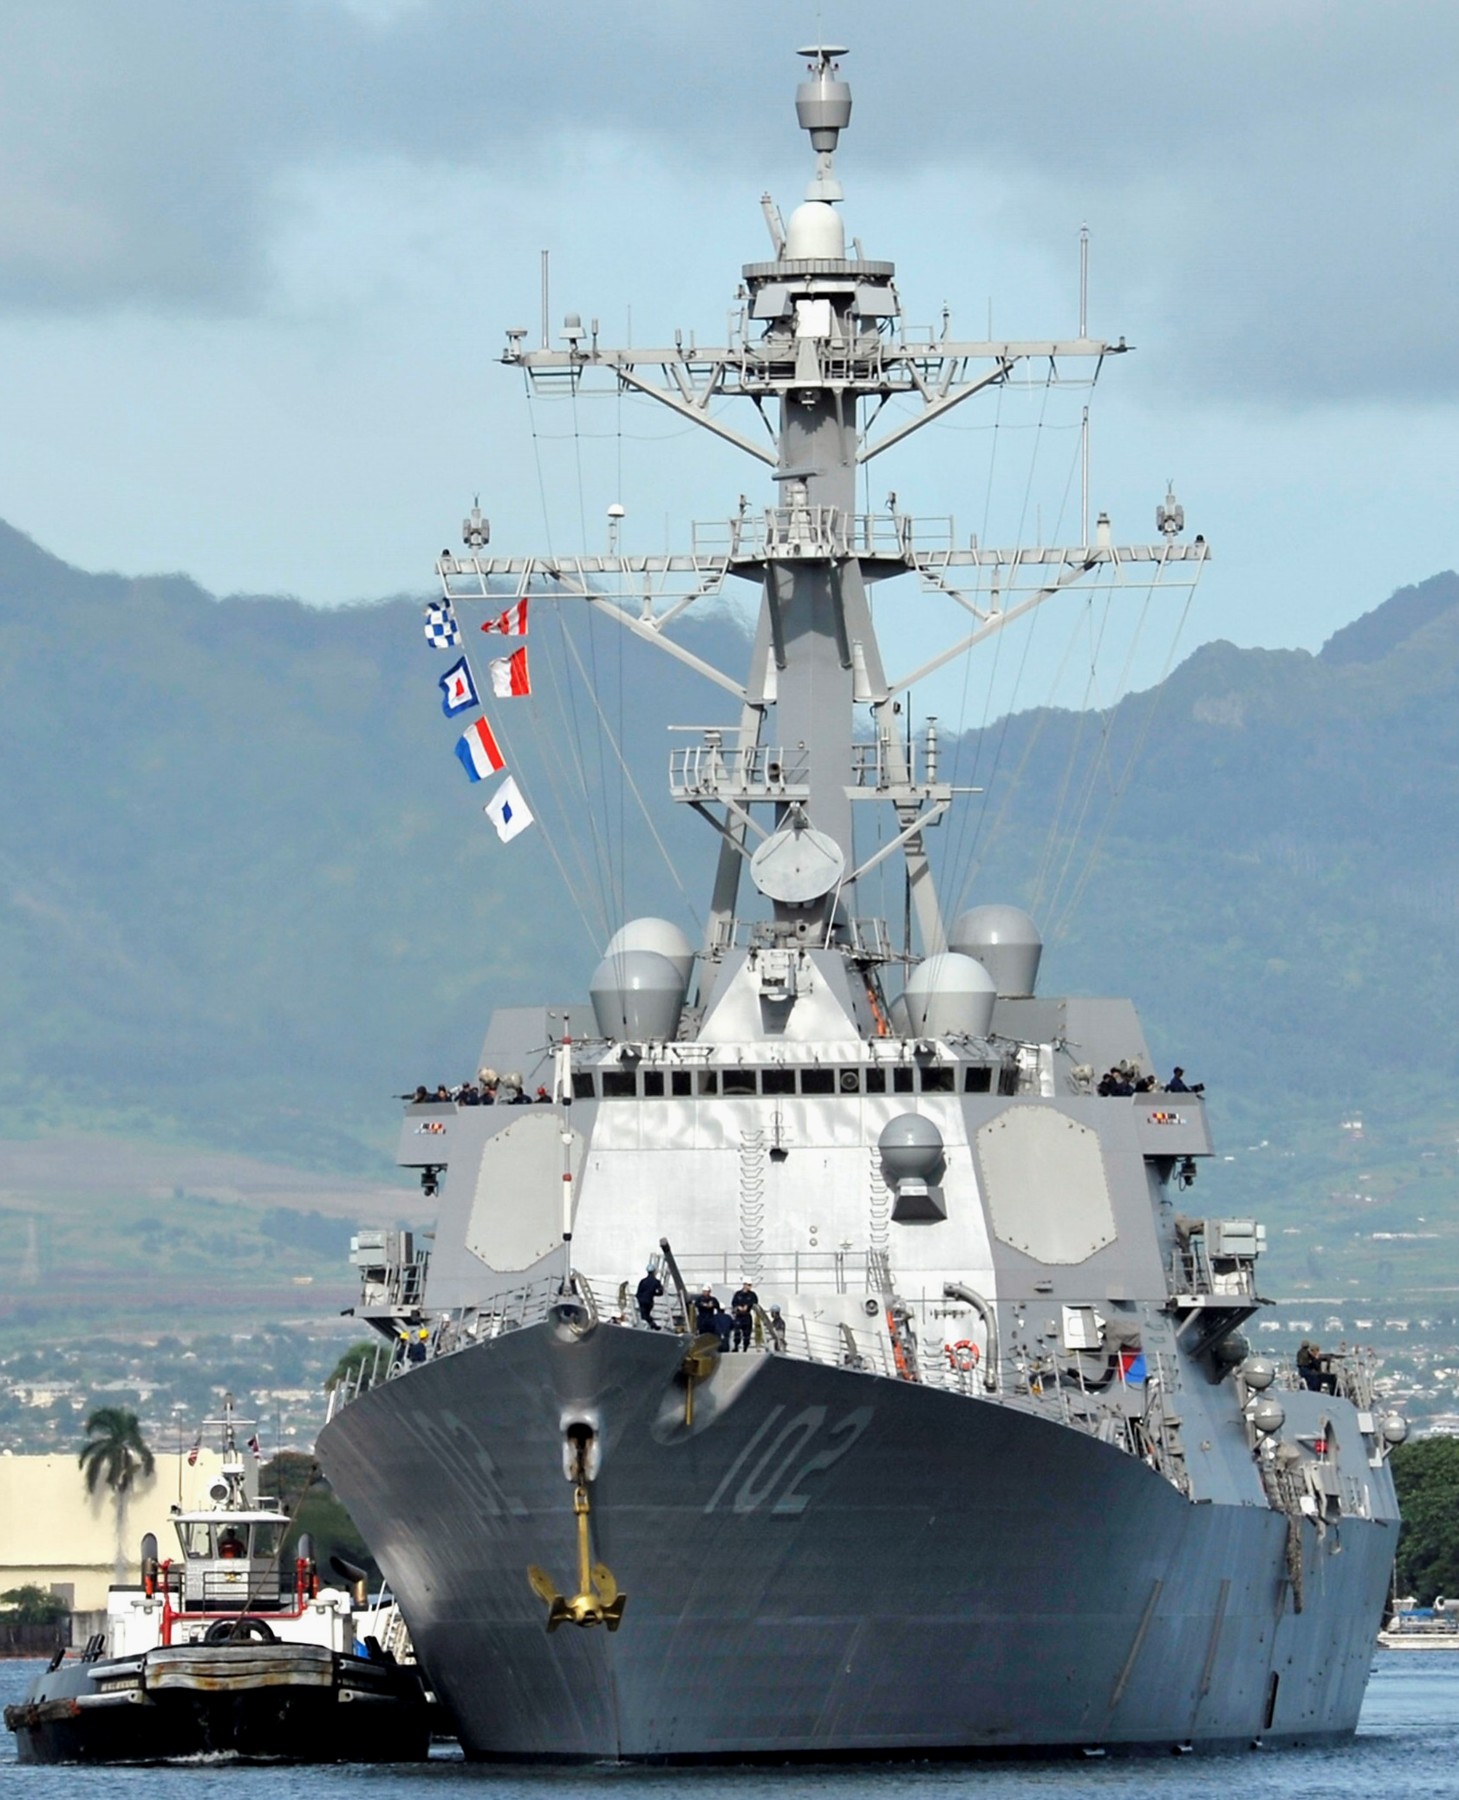 ddg-102 uss sampson guided missile destroyer 2014 17 joint base pearl harbor hickam hawaii